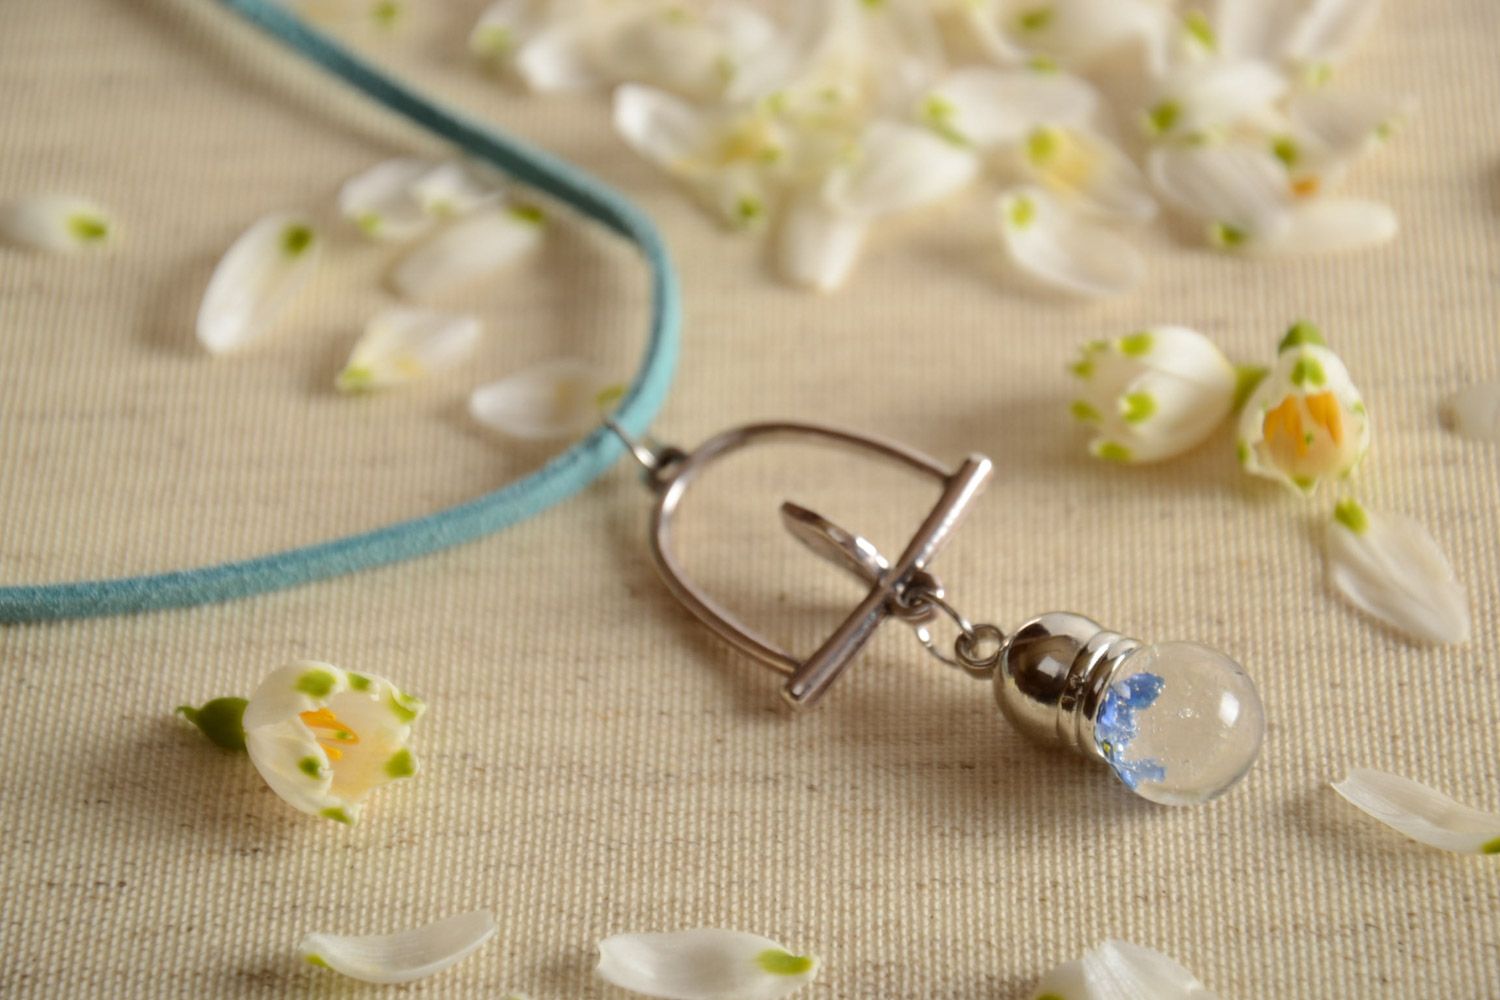 Handmade neck pendant on suede cord with real flowers coated with epoxy resin photo 1